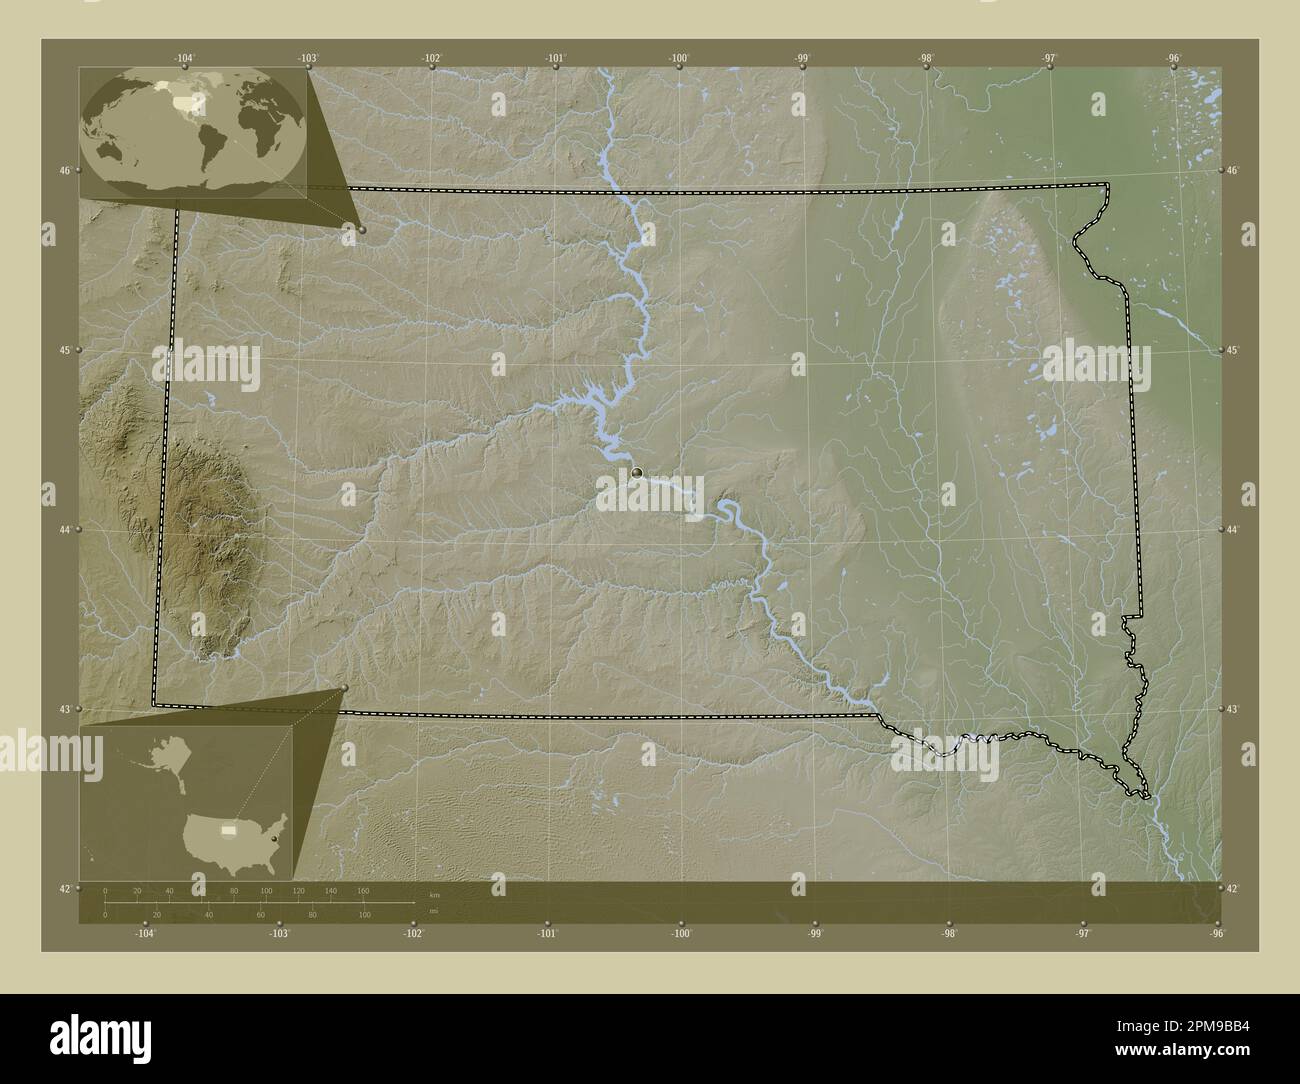 Large detailed map of Red Dead Redemption World, Games, Mapsland